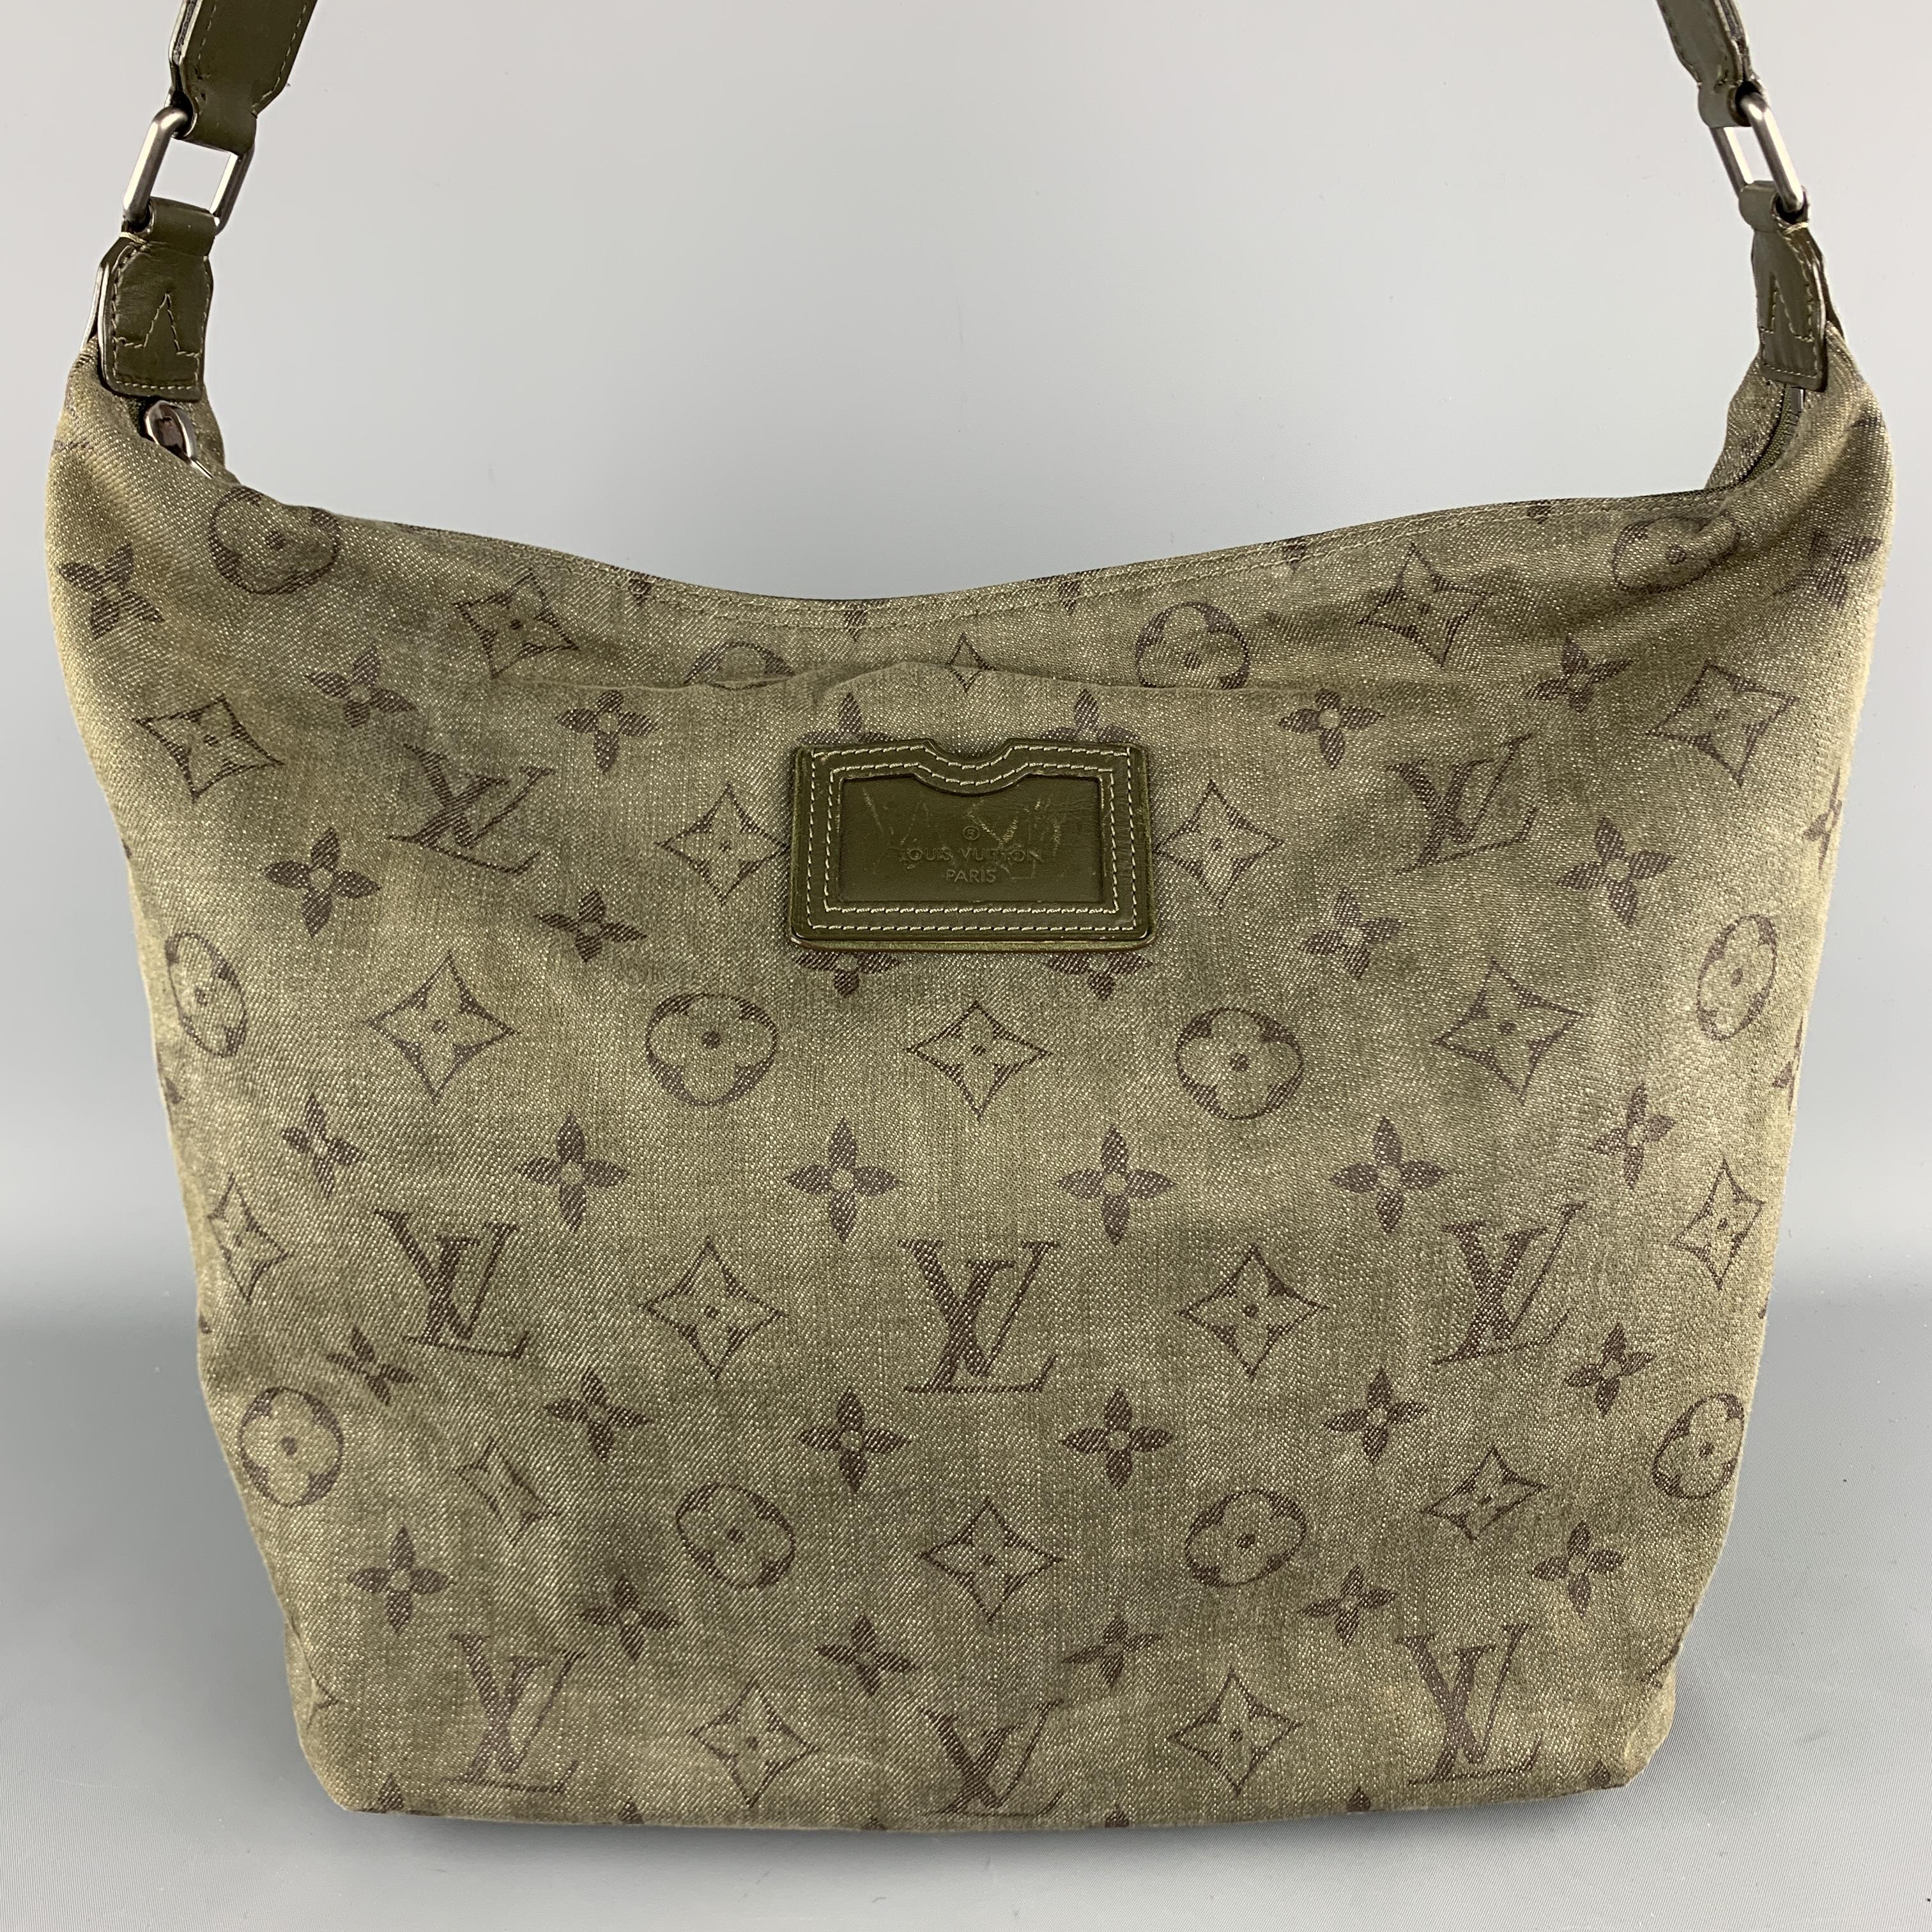 Authentic LOUIS VUITTON bag from the Spring/Summer 2011 Collection. Green monogram canvas LV Impression Besace Bag with silver-tone hardware, adjustable shoulder strap, olive green leather trim, green woven interior lining, three pockets at interior